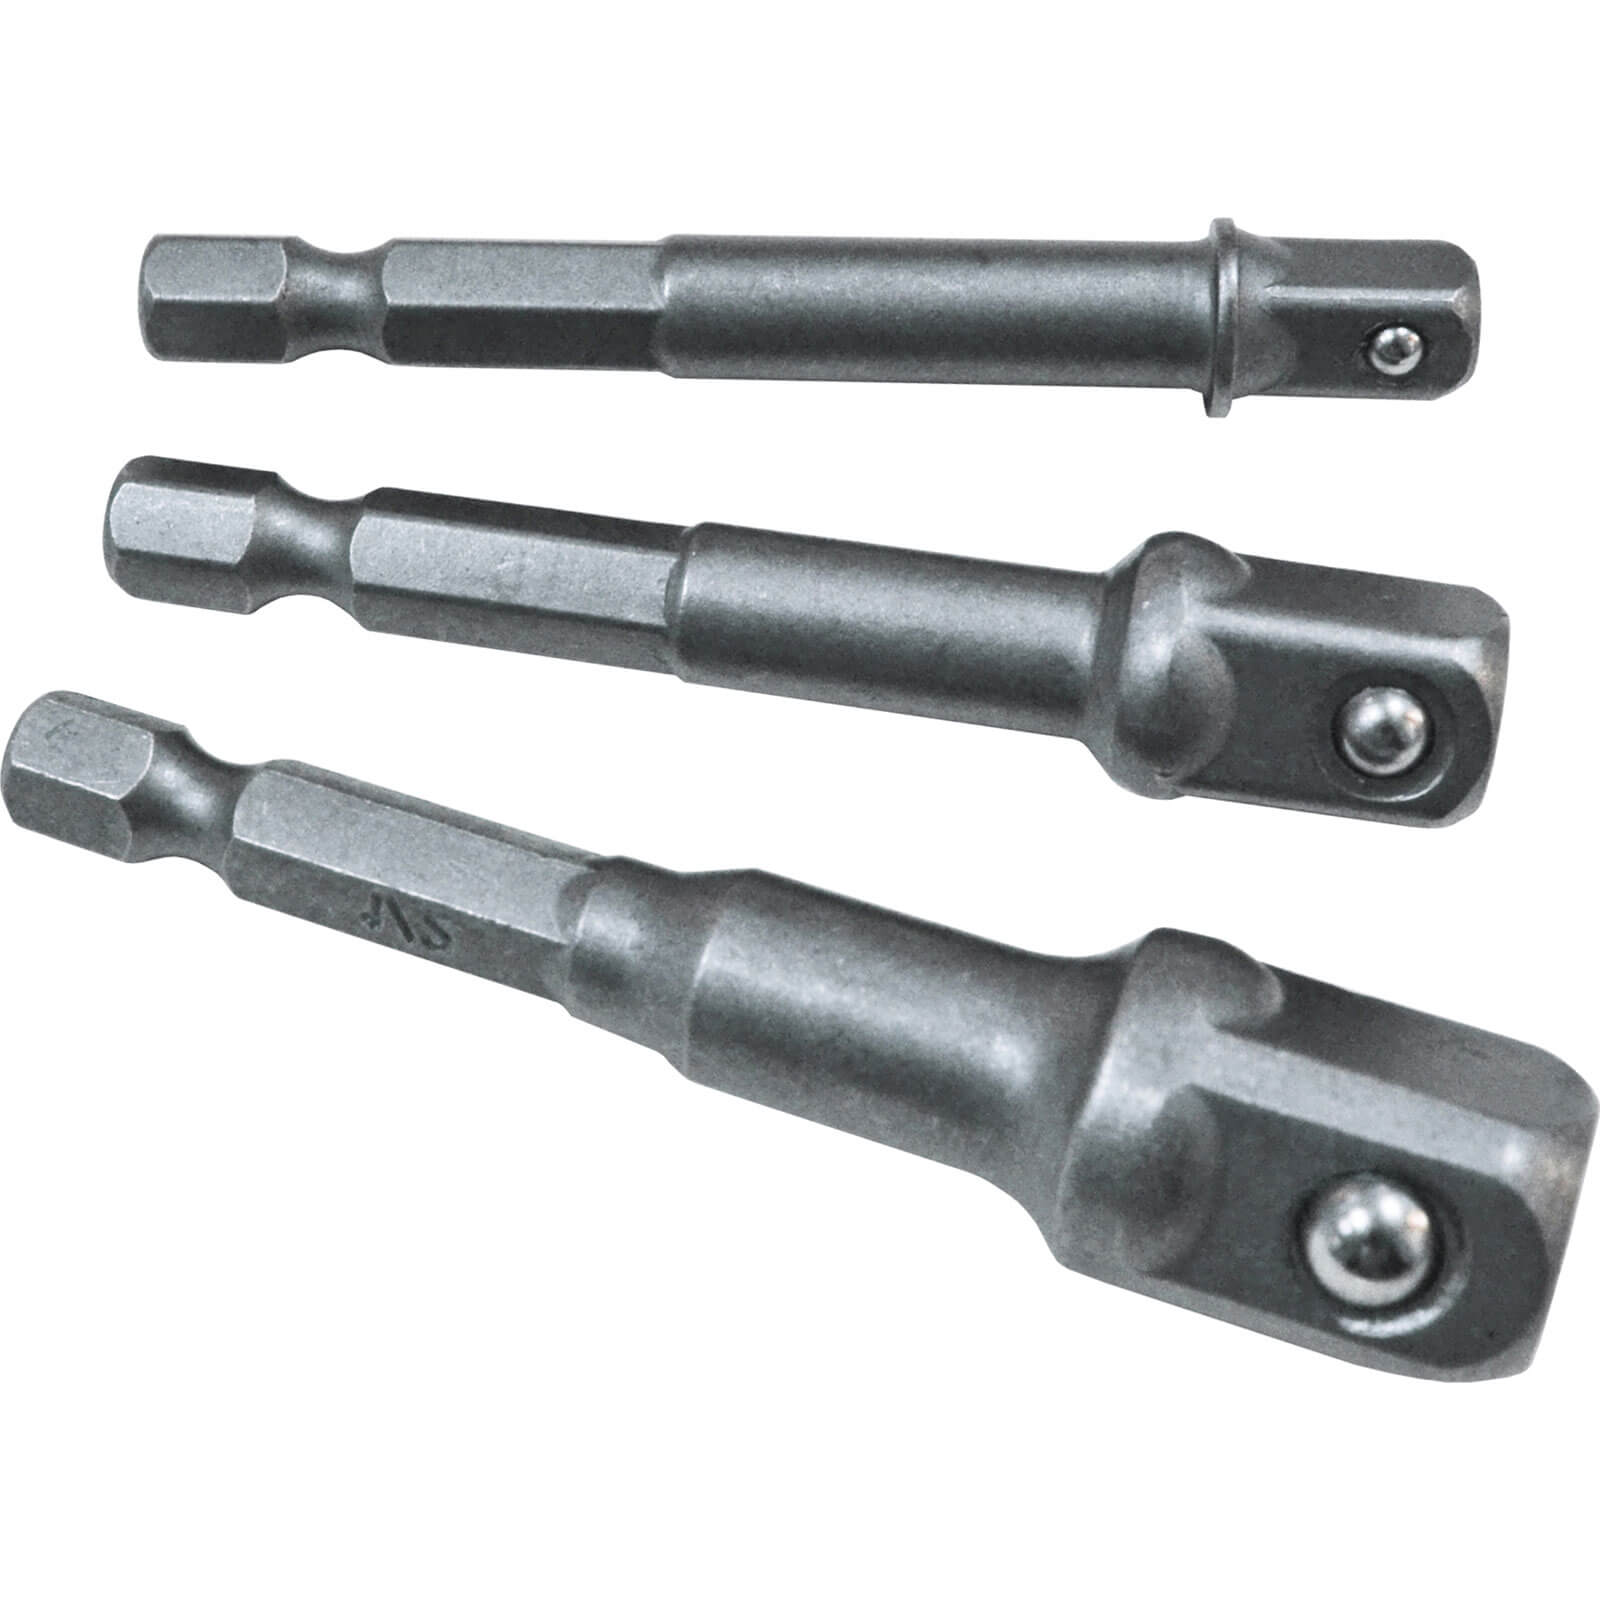 Image of Faithfull 3 Piece 1/4" Hex to Square Drive Adaptor Set